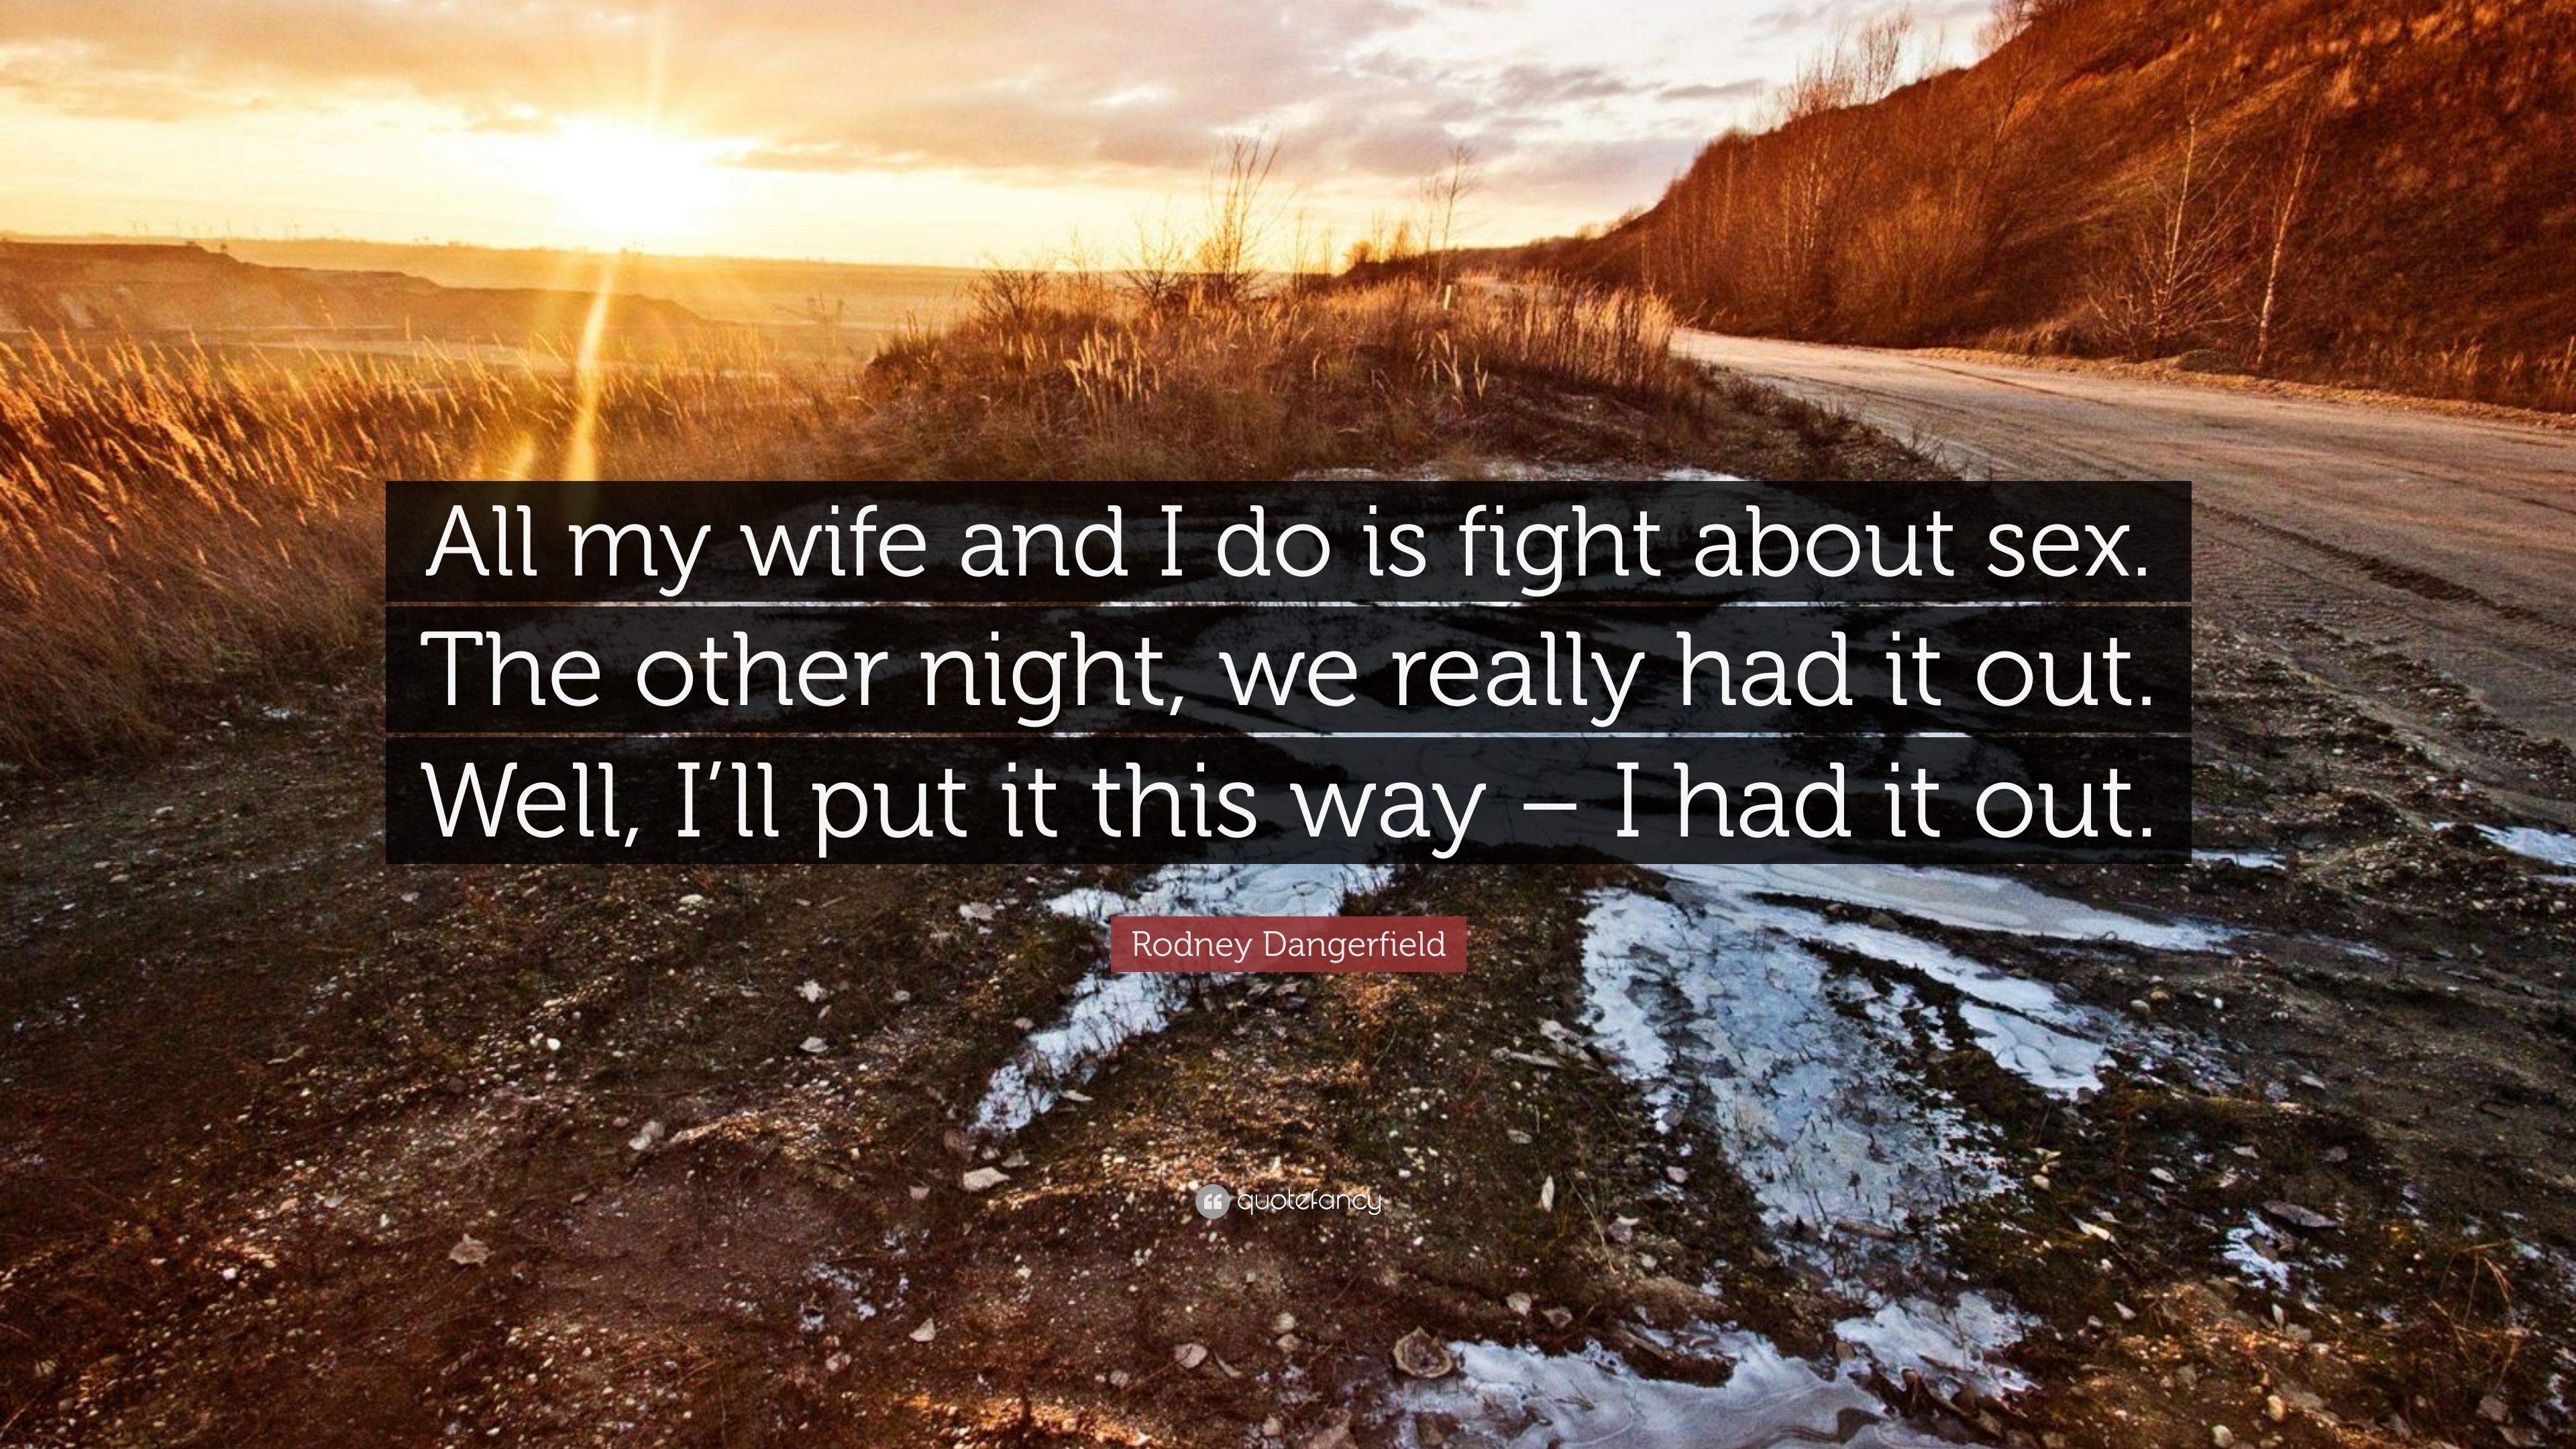 Rodney Dangerfield Quote “All my wife and I do is fight about pic